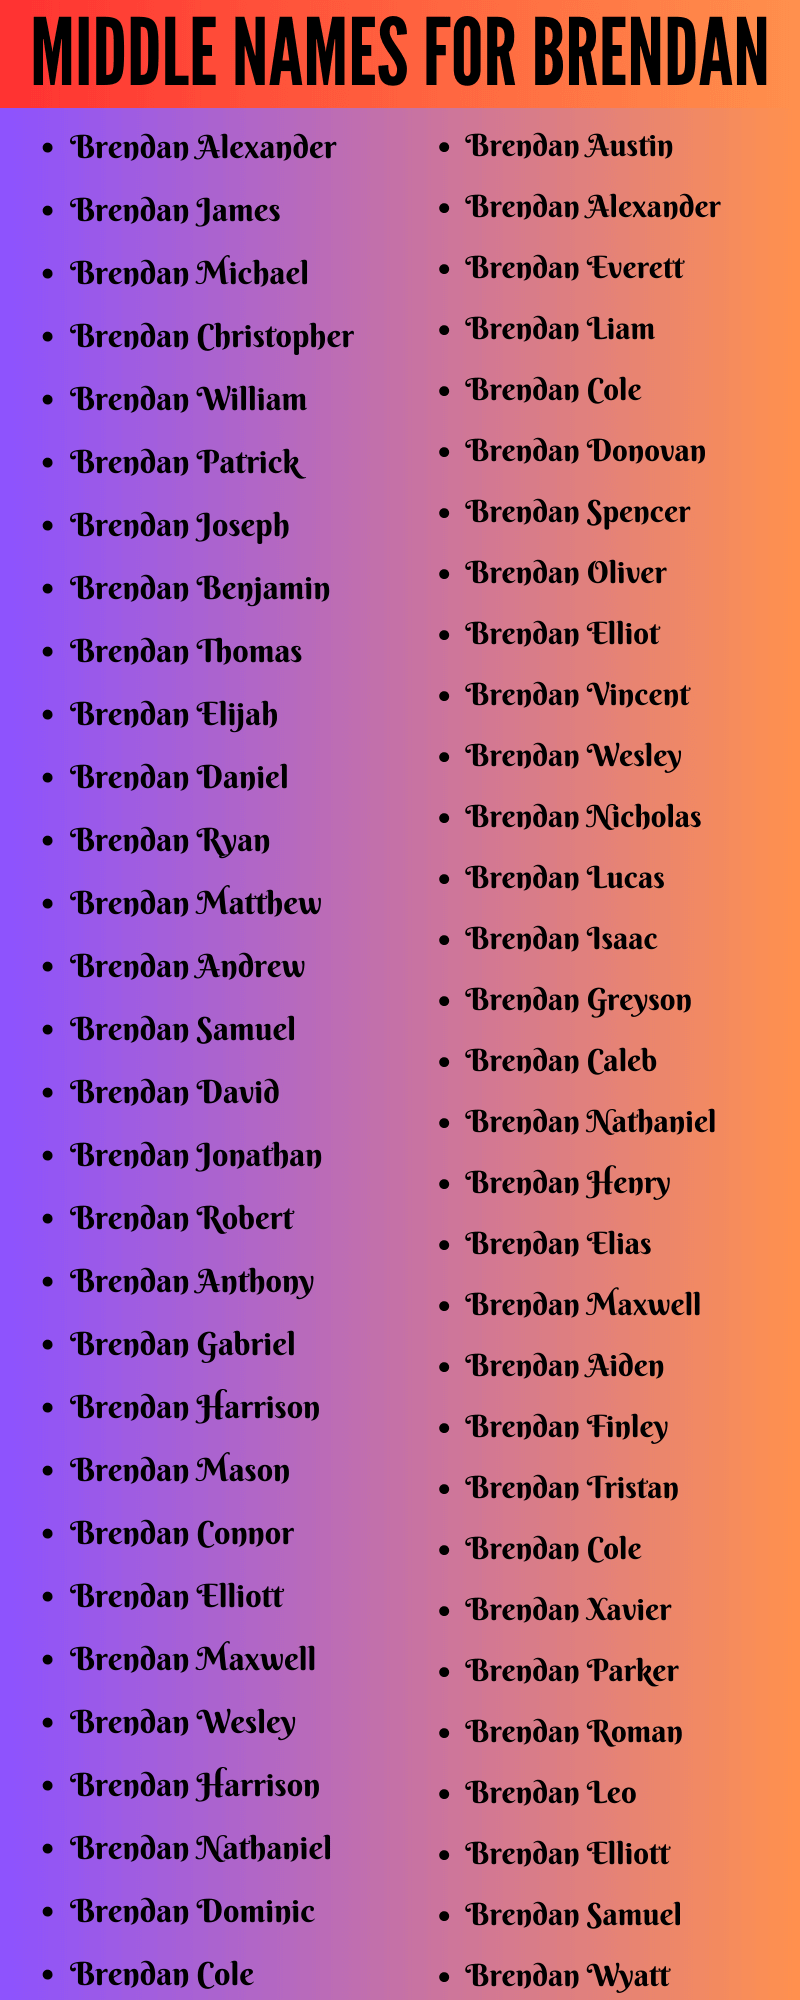 400 Cute Middle Names For Brendan